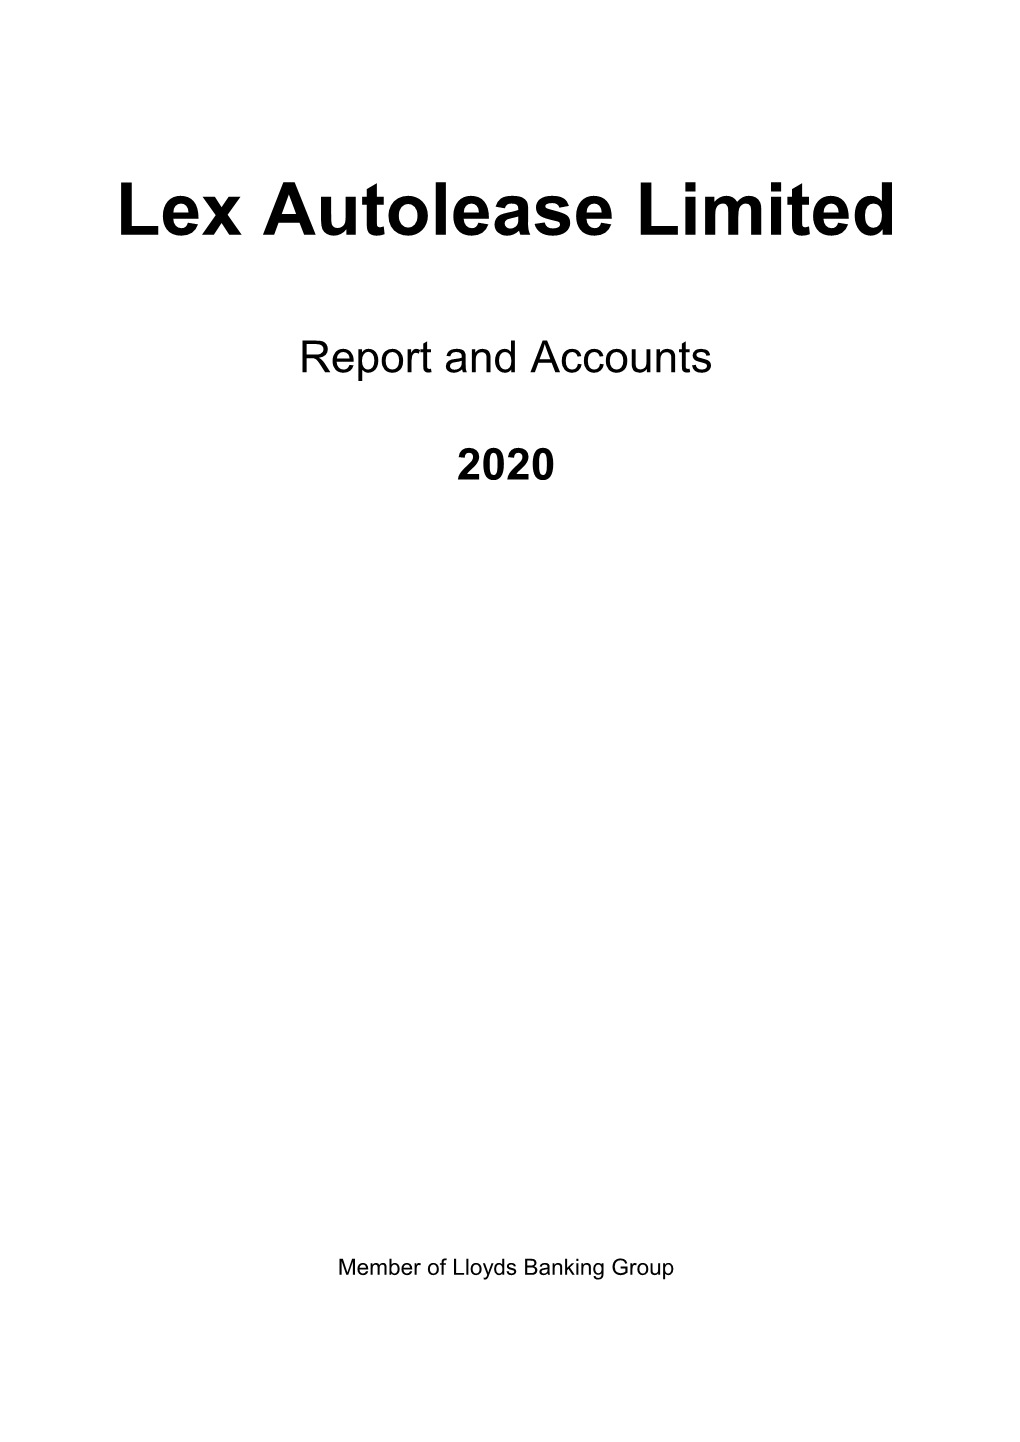 Lex Autolease Limited Annual Report